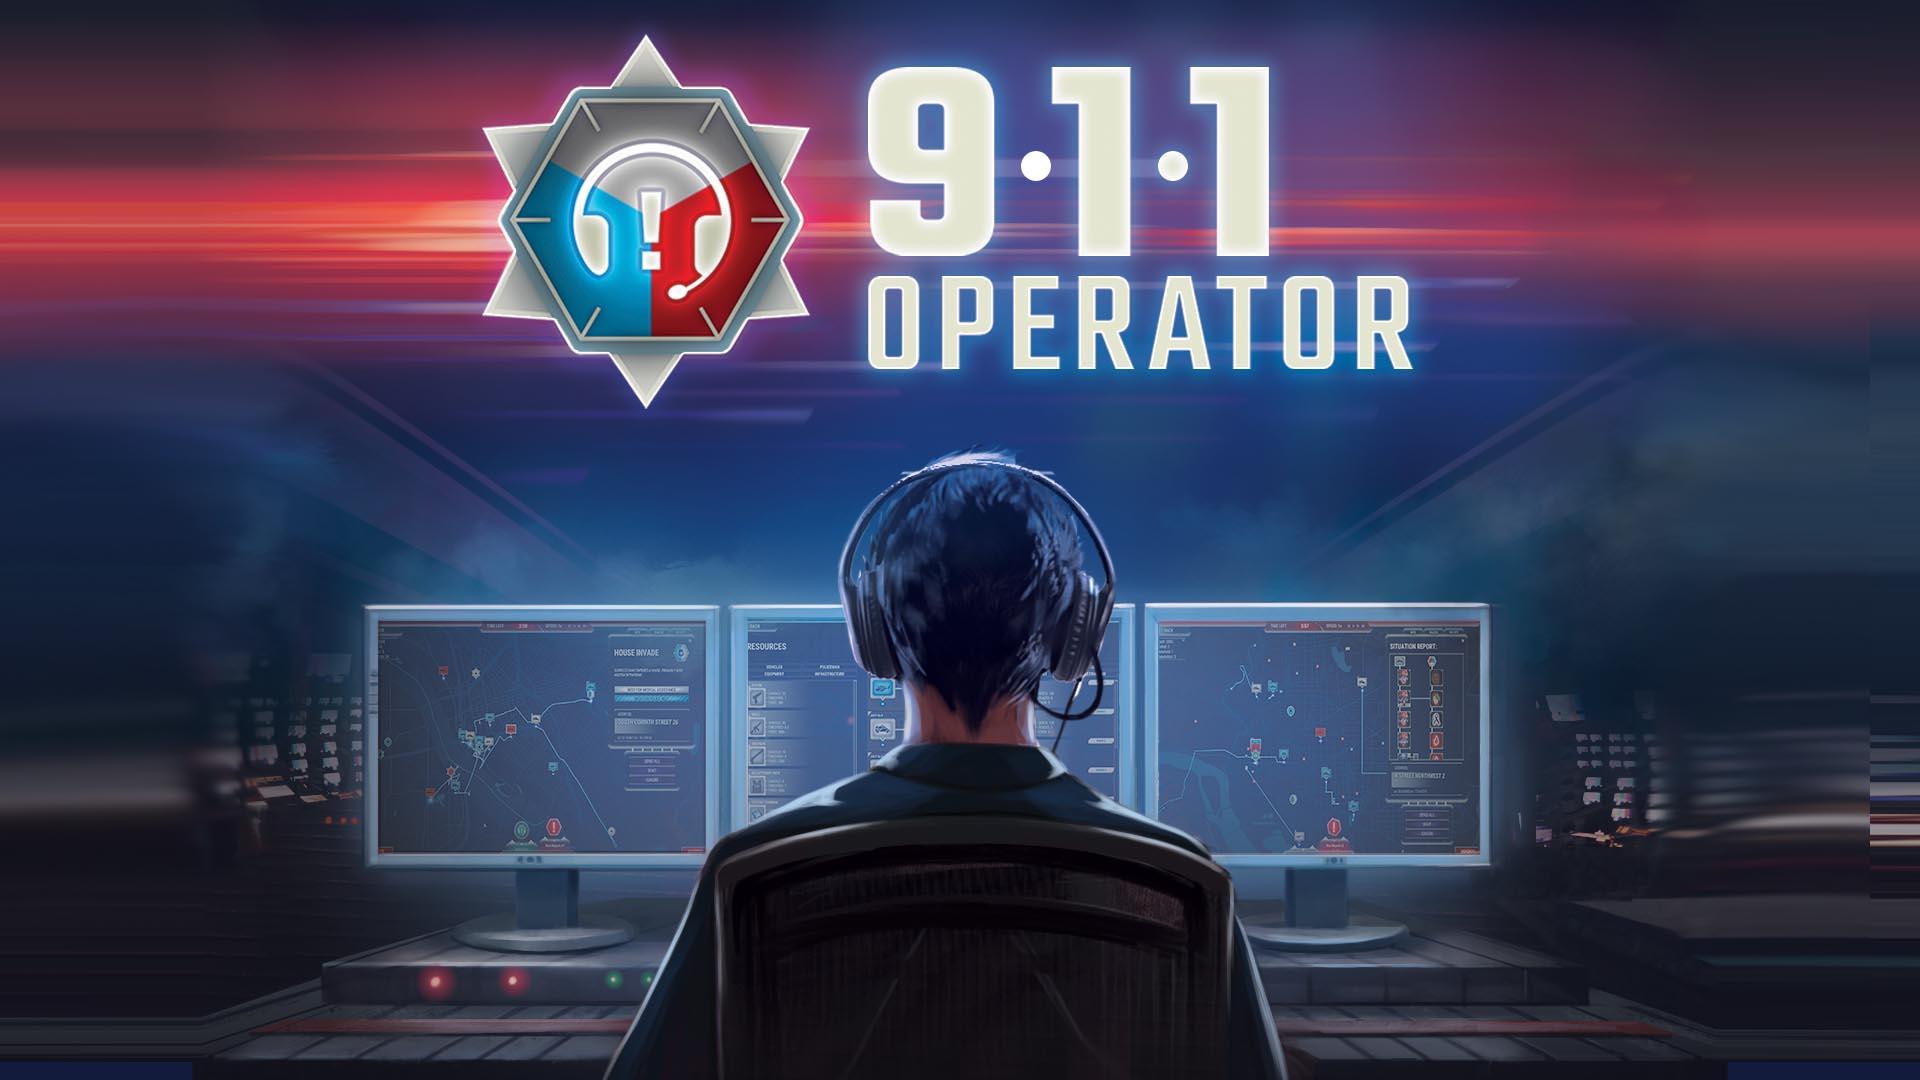 Emergency Dispatch Center. Wallpaper from 911 Operator